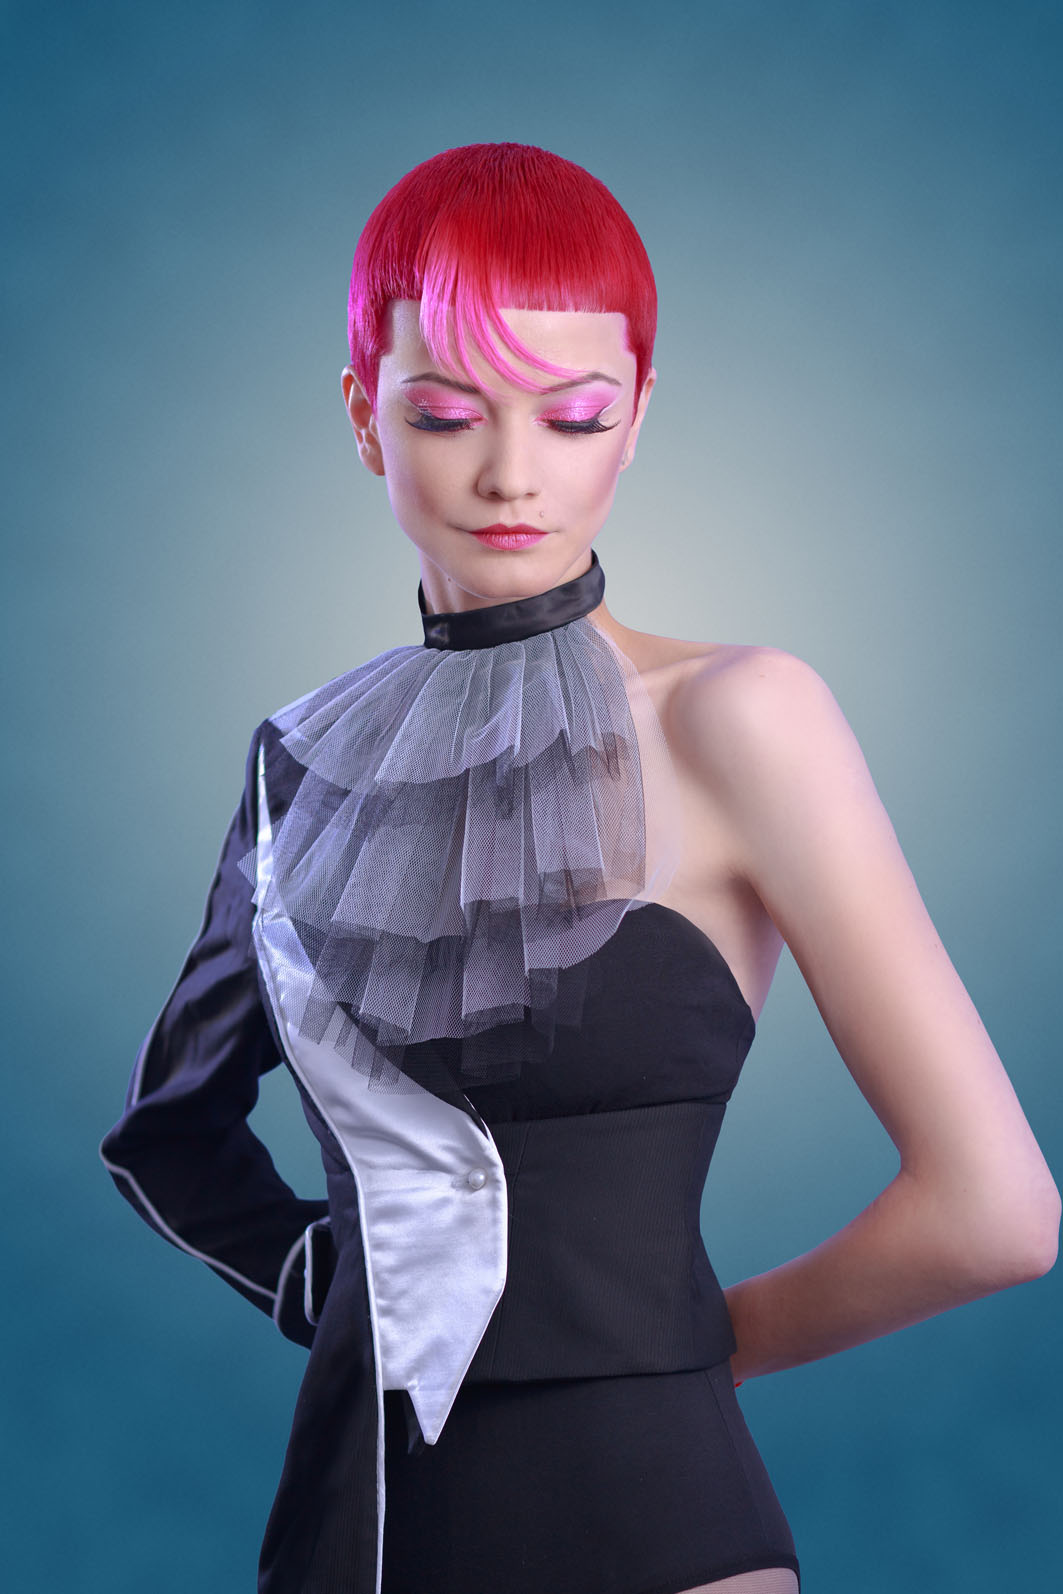 Cosmobeauty_2015_hair_competition_01